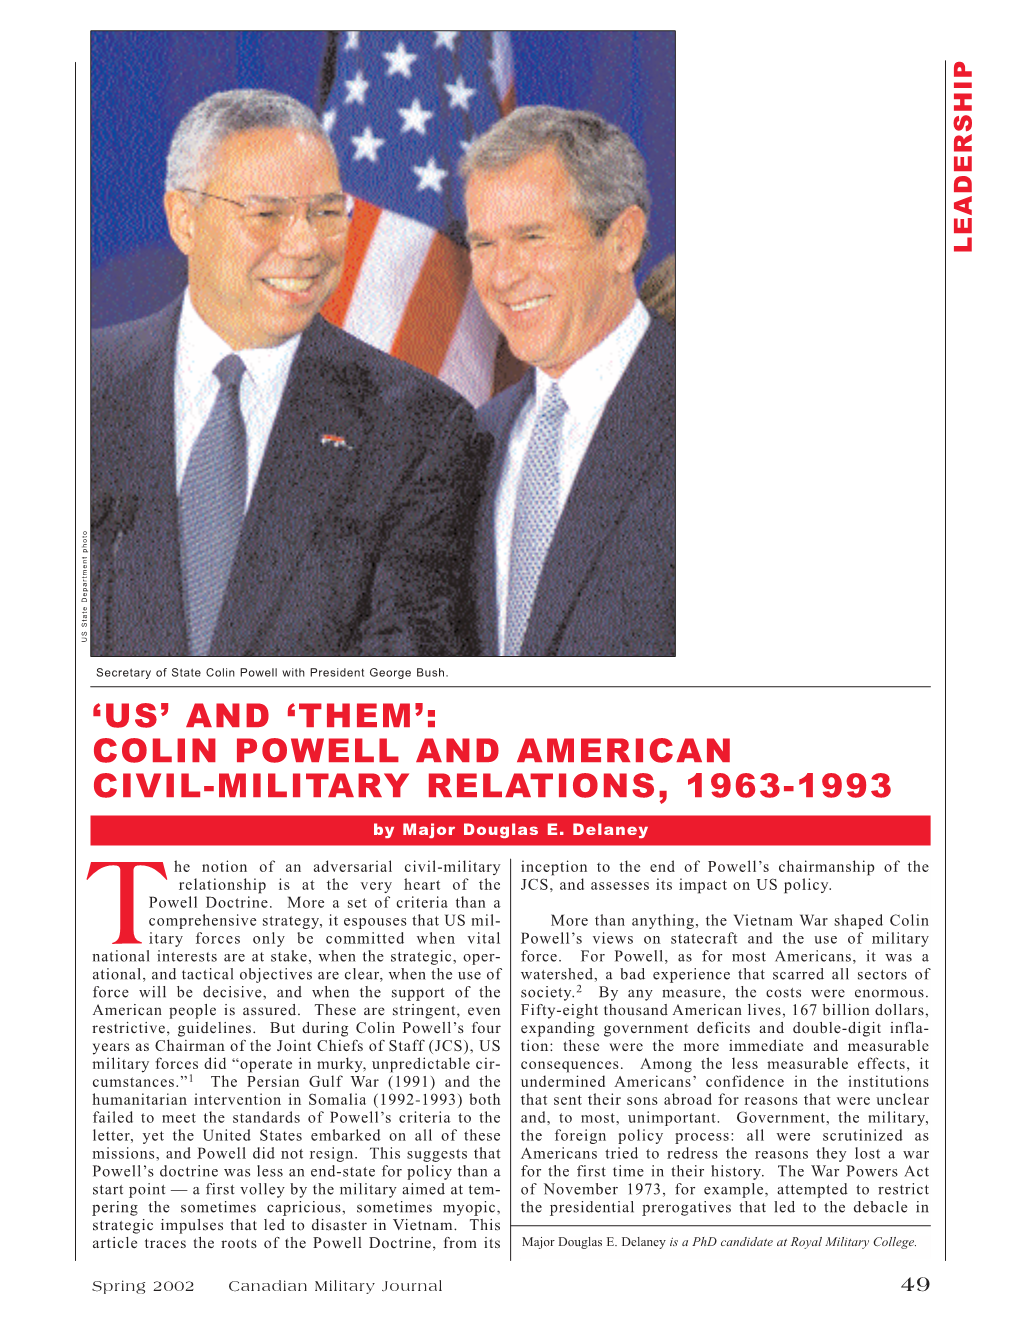 'Them': Colin Powel and American Civil-Military Relations, 1963-1993